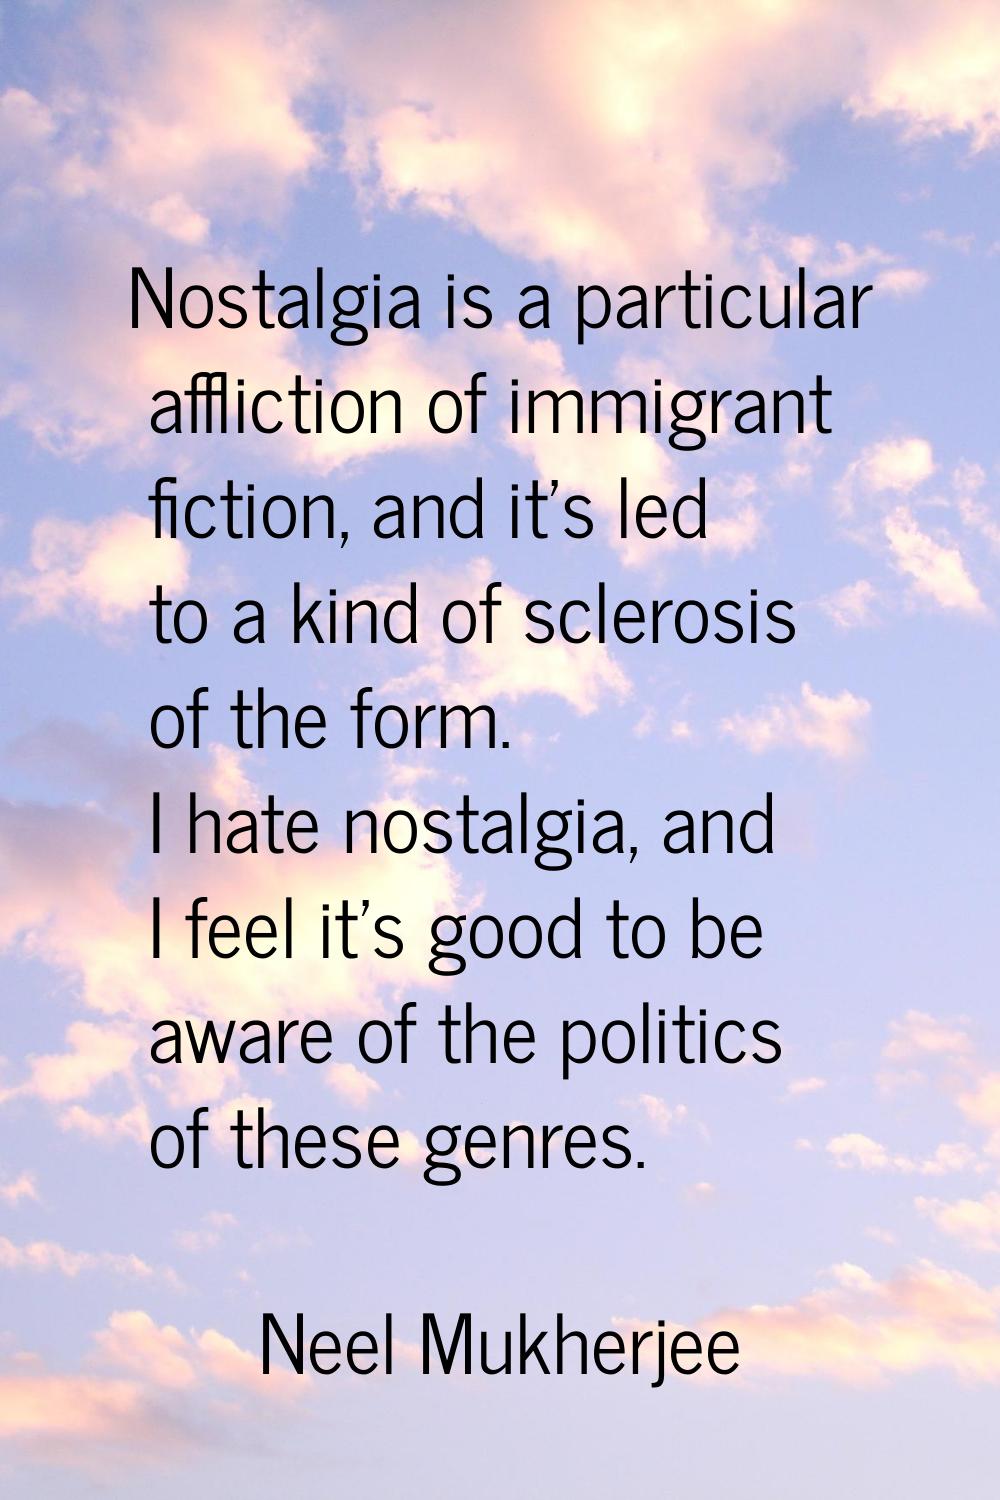 Nostalgia is a particular affliction of immigrant fiction, and it's led to a kind of sclerosis of t